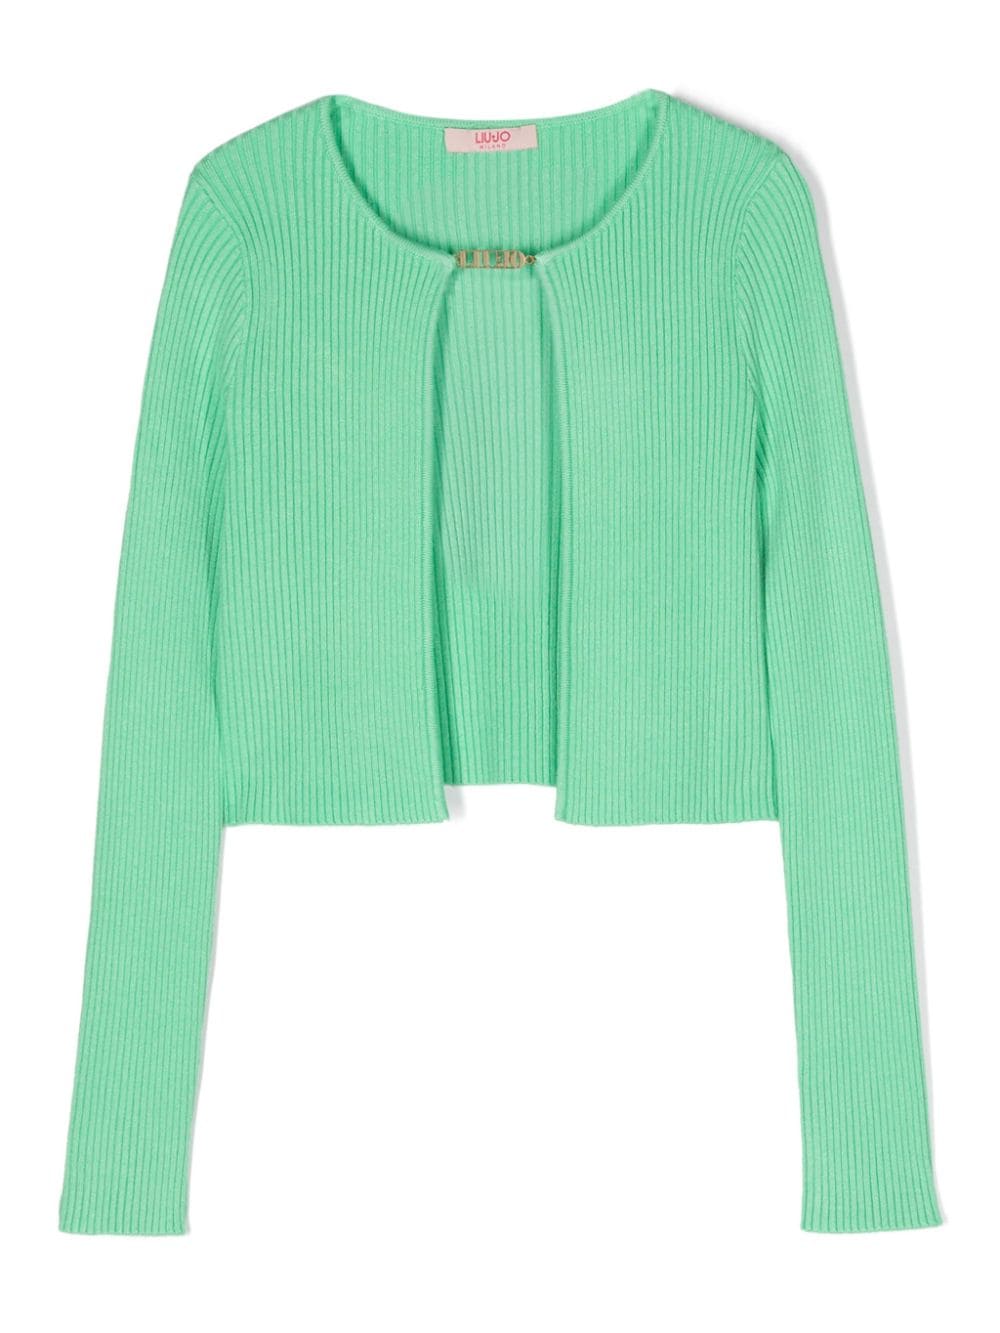 Green cardigan for girls with logo plaque